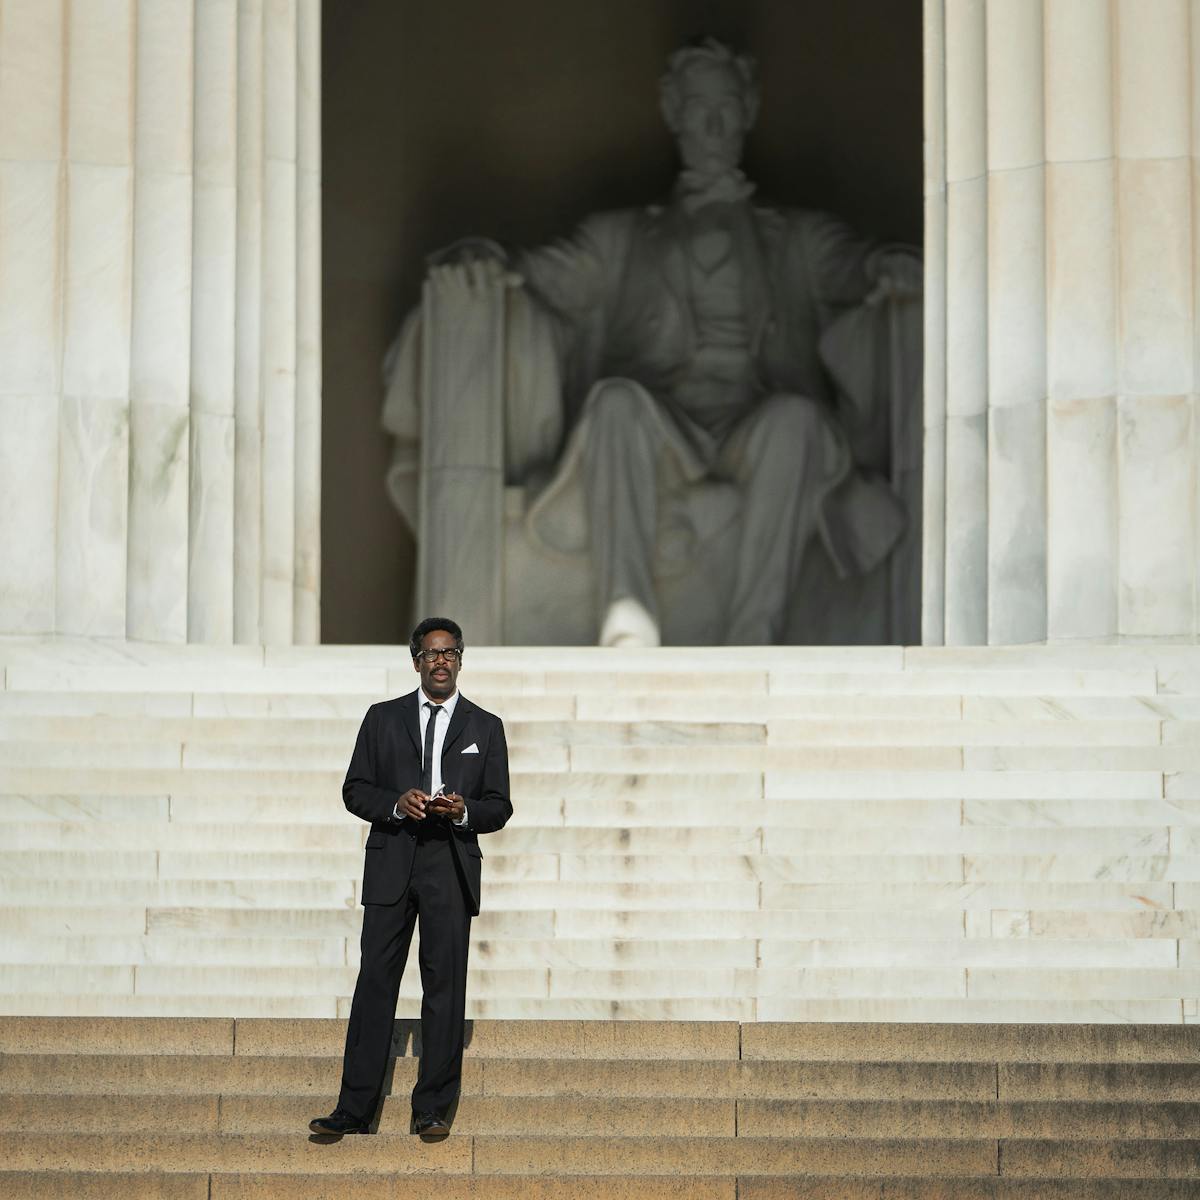 Bayard Rustin (Colman Domingo) wears a dark suit and stands at the Lincoln Memorial.